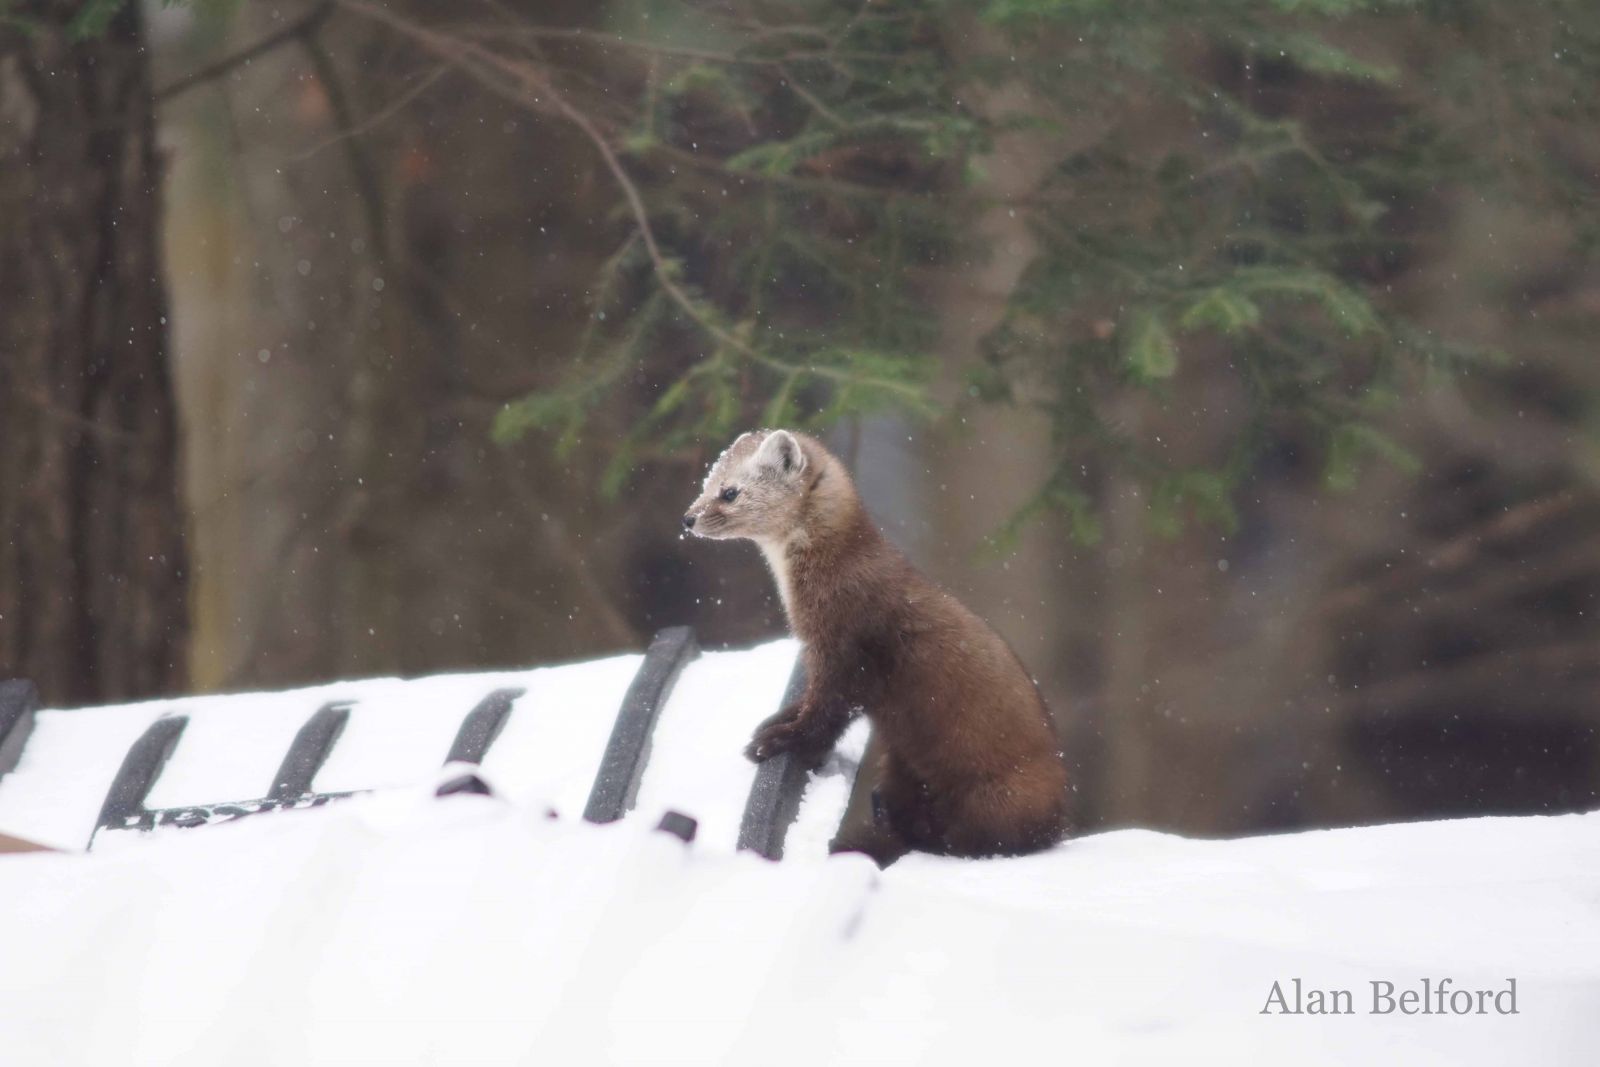 A marten looks around from its perch atop a dumpster.